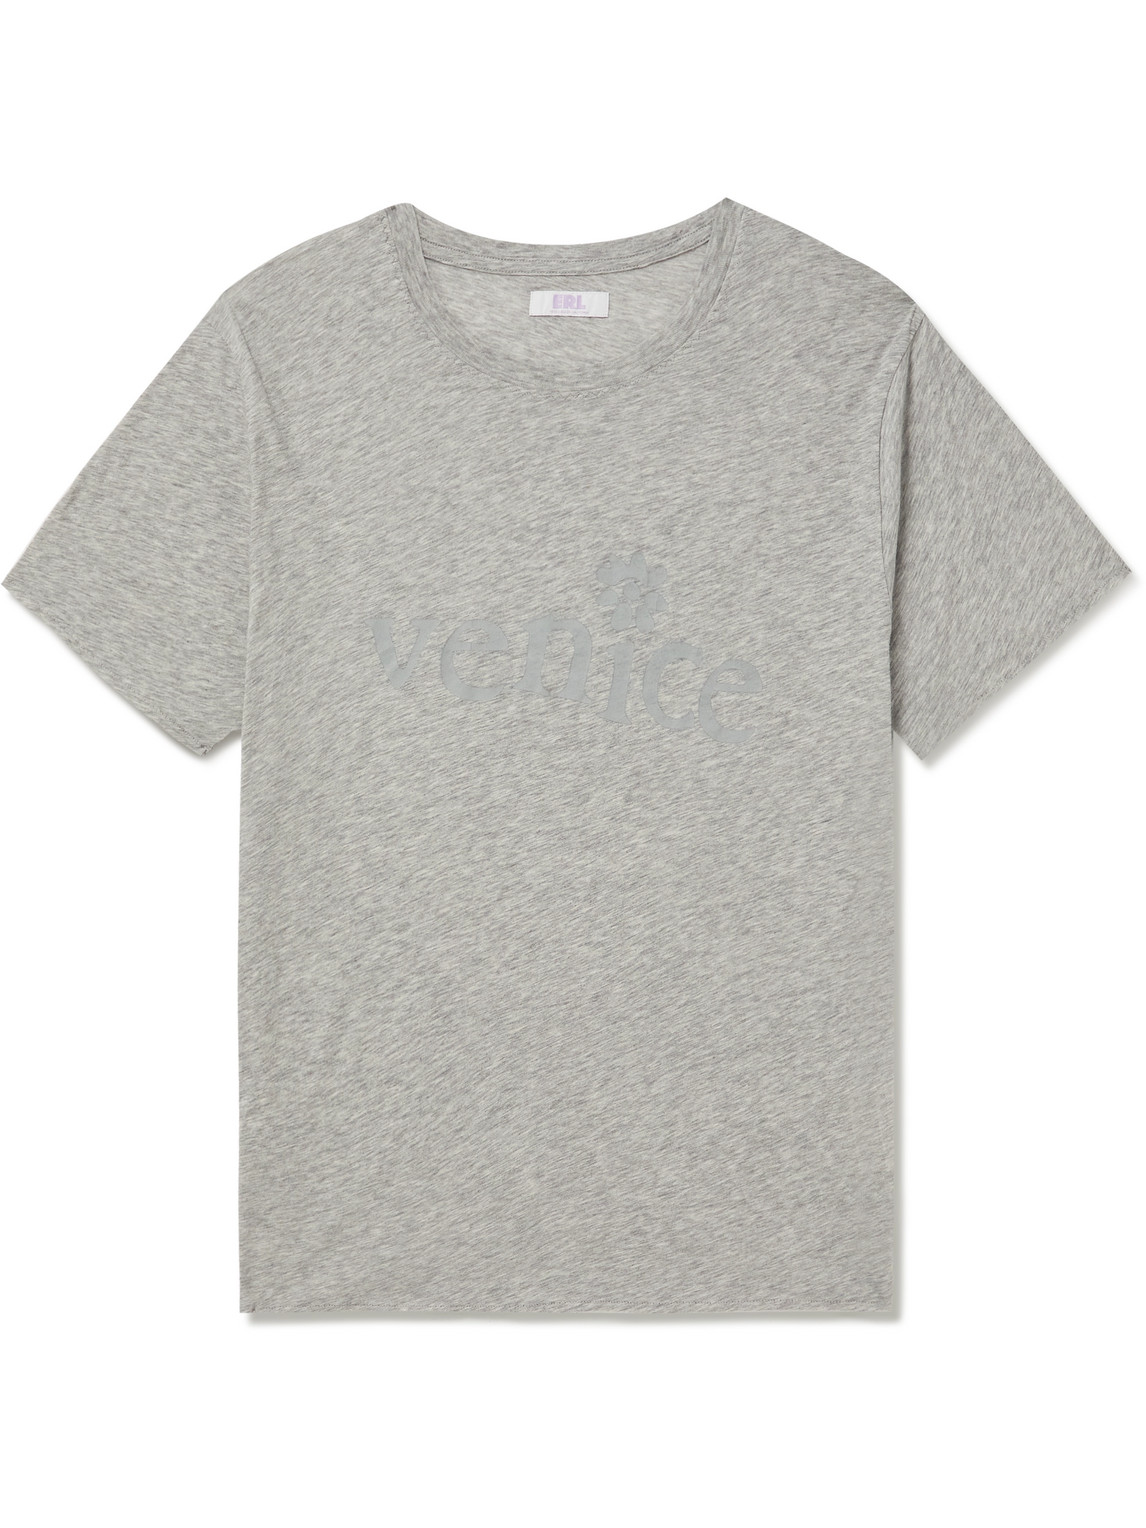 ERL Venice Printed Cotton-Jersey T-Shirt